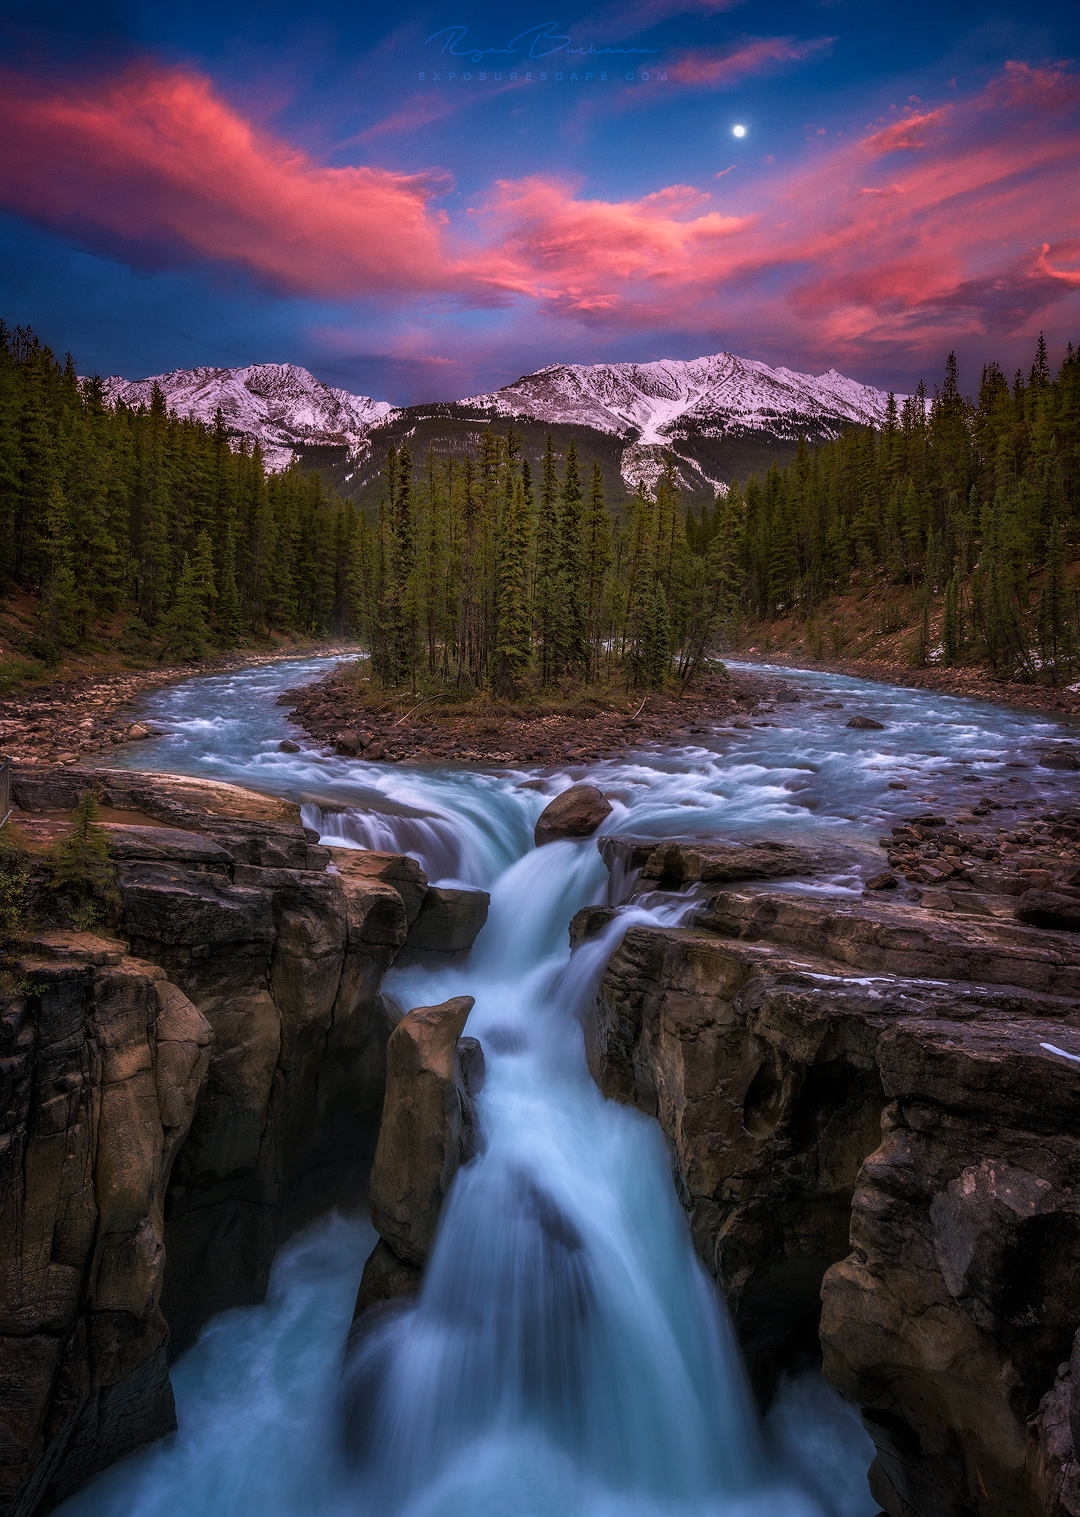 Sunwapta waterfall at sunset with moon in jasper national park in Canada